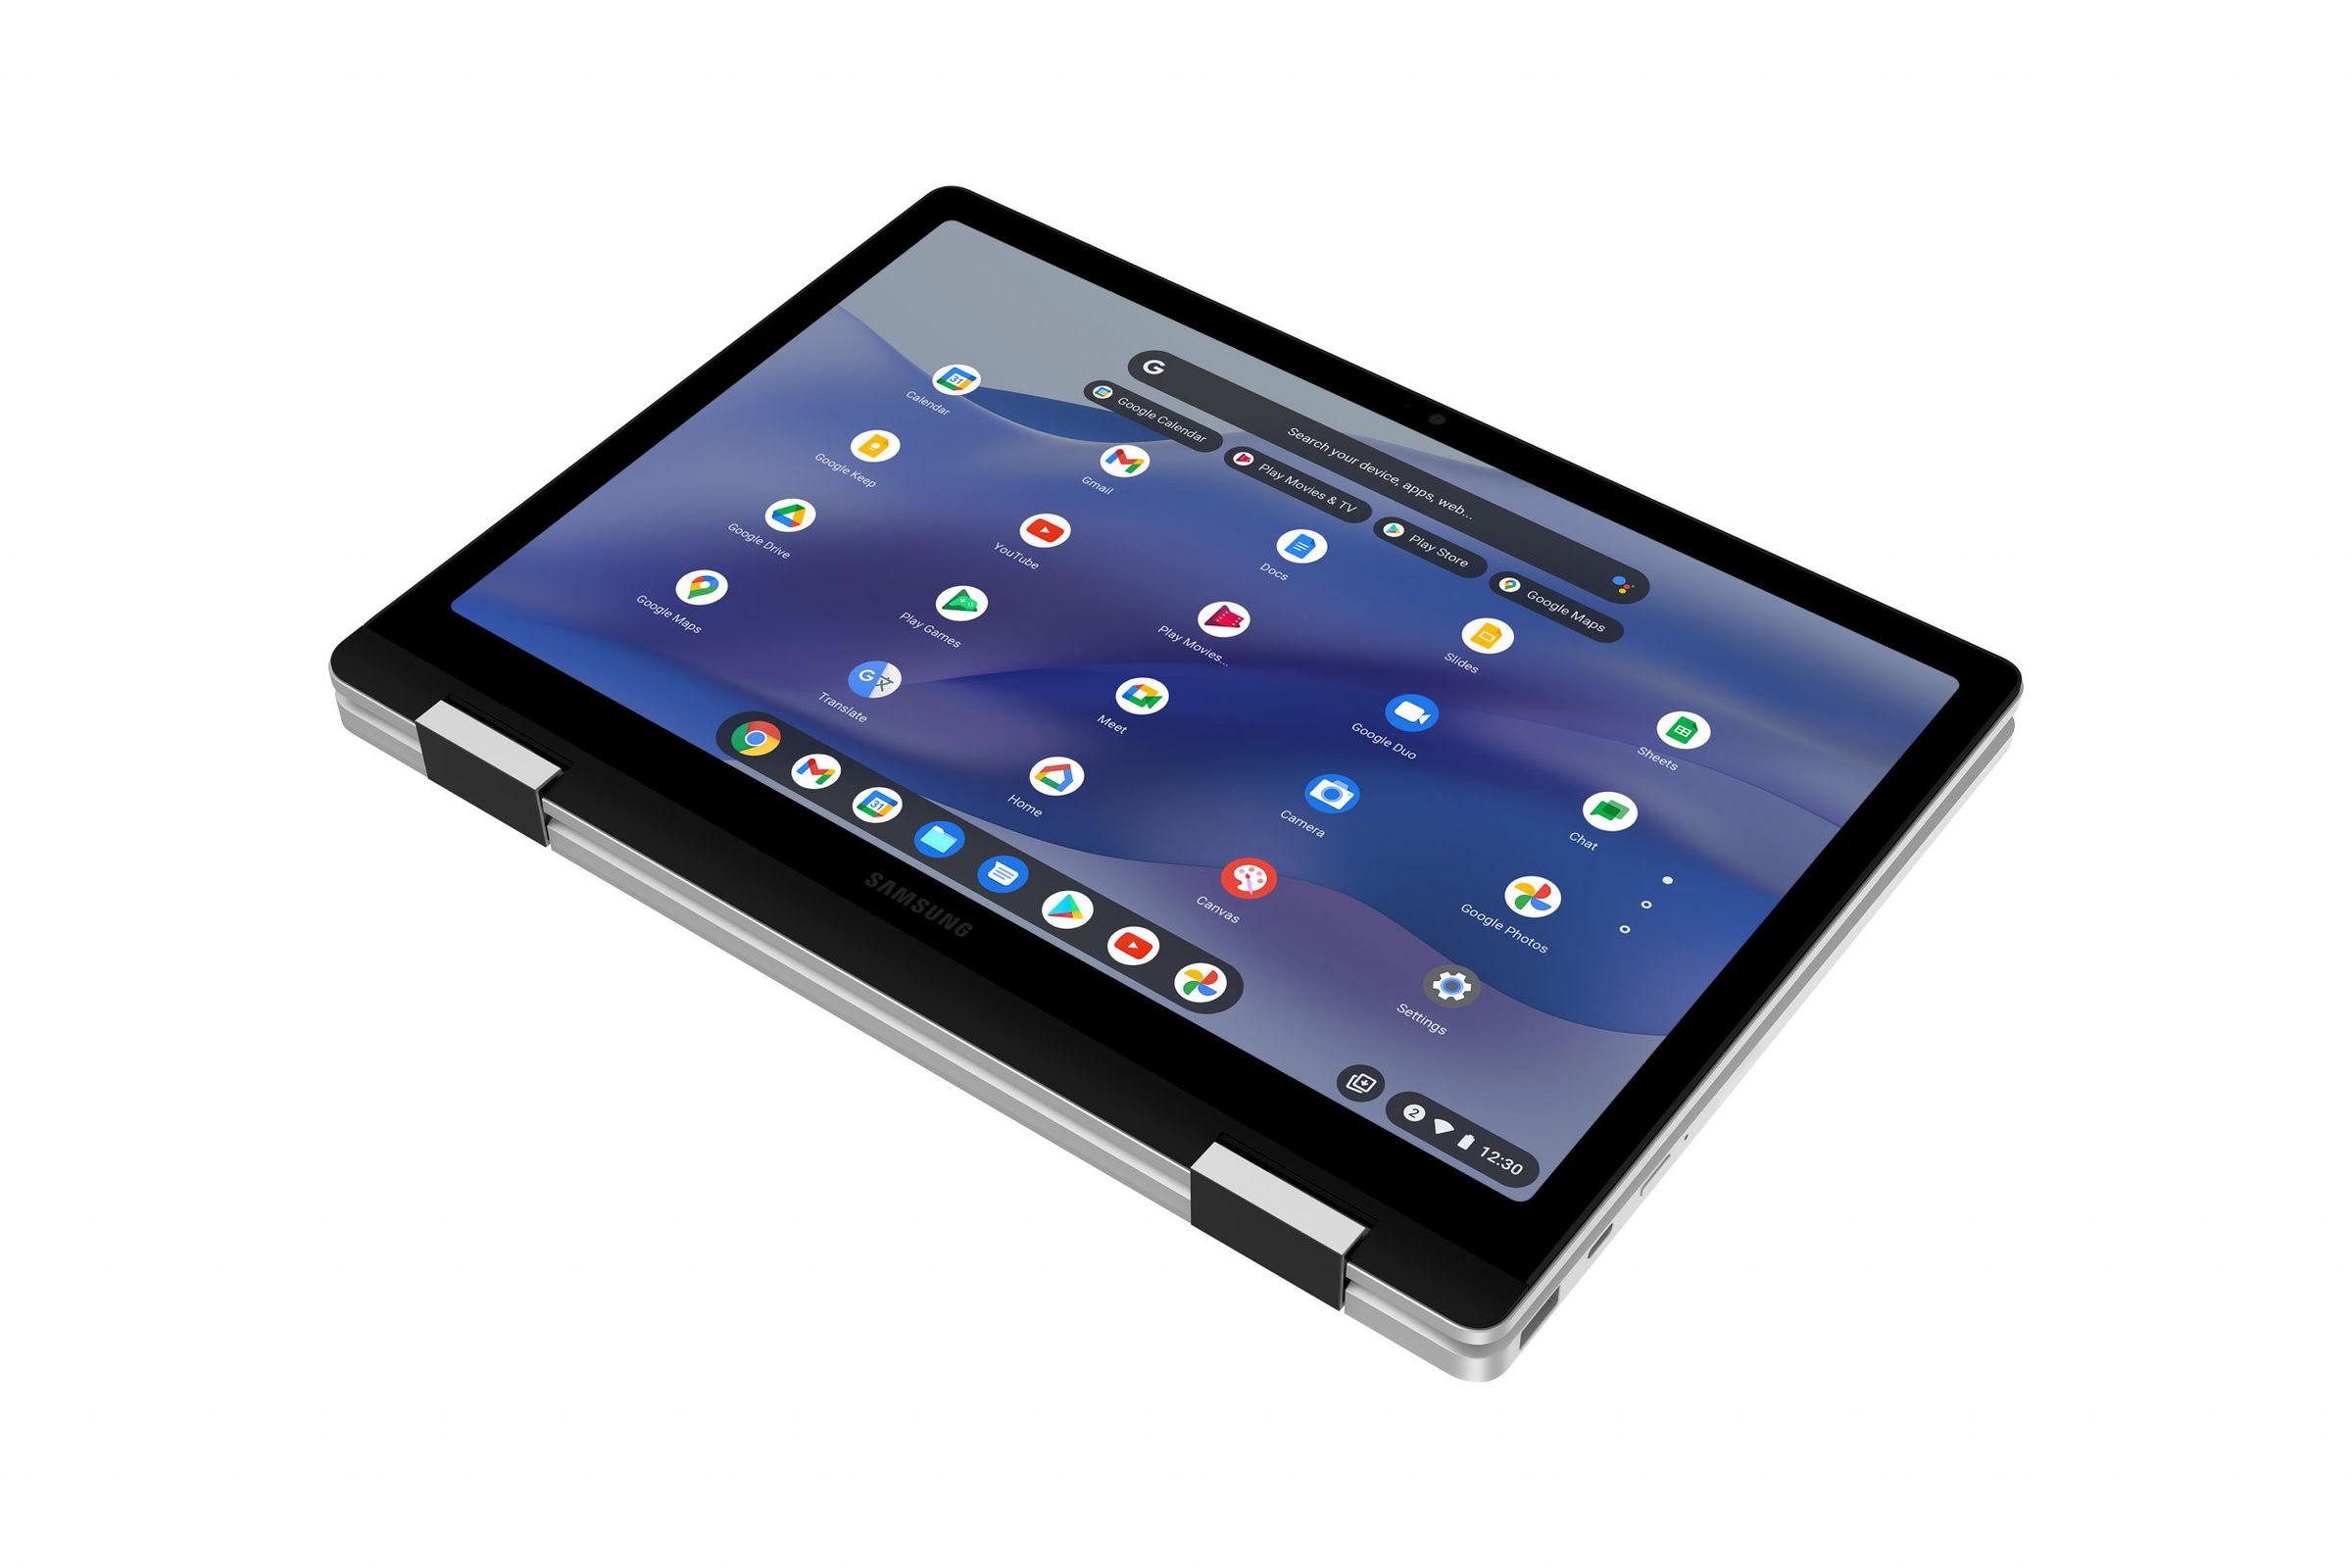 The Samsung Galaxy Chromebook 2 360 in tablet mode on a white background. The screen displays the Chrome OS launcher on a blue background.